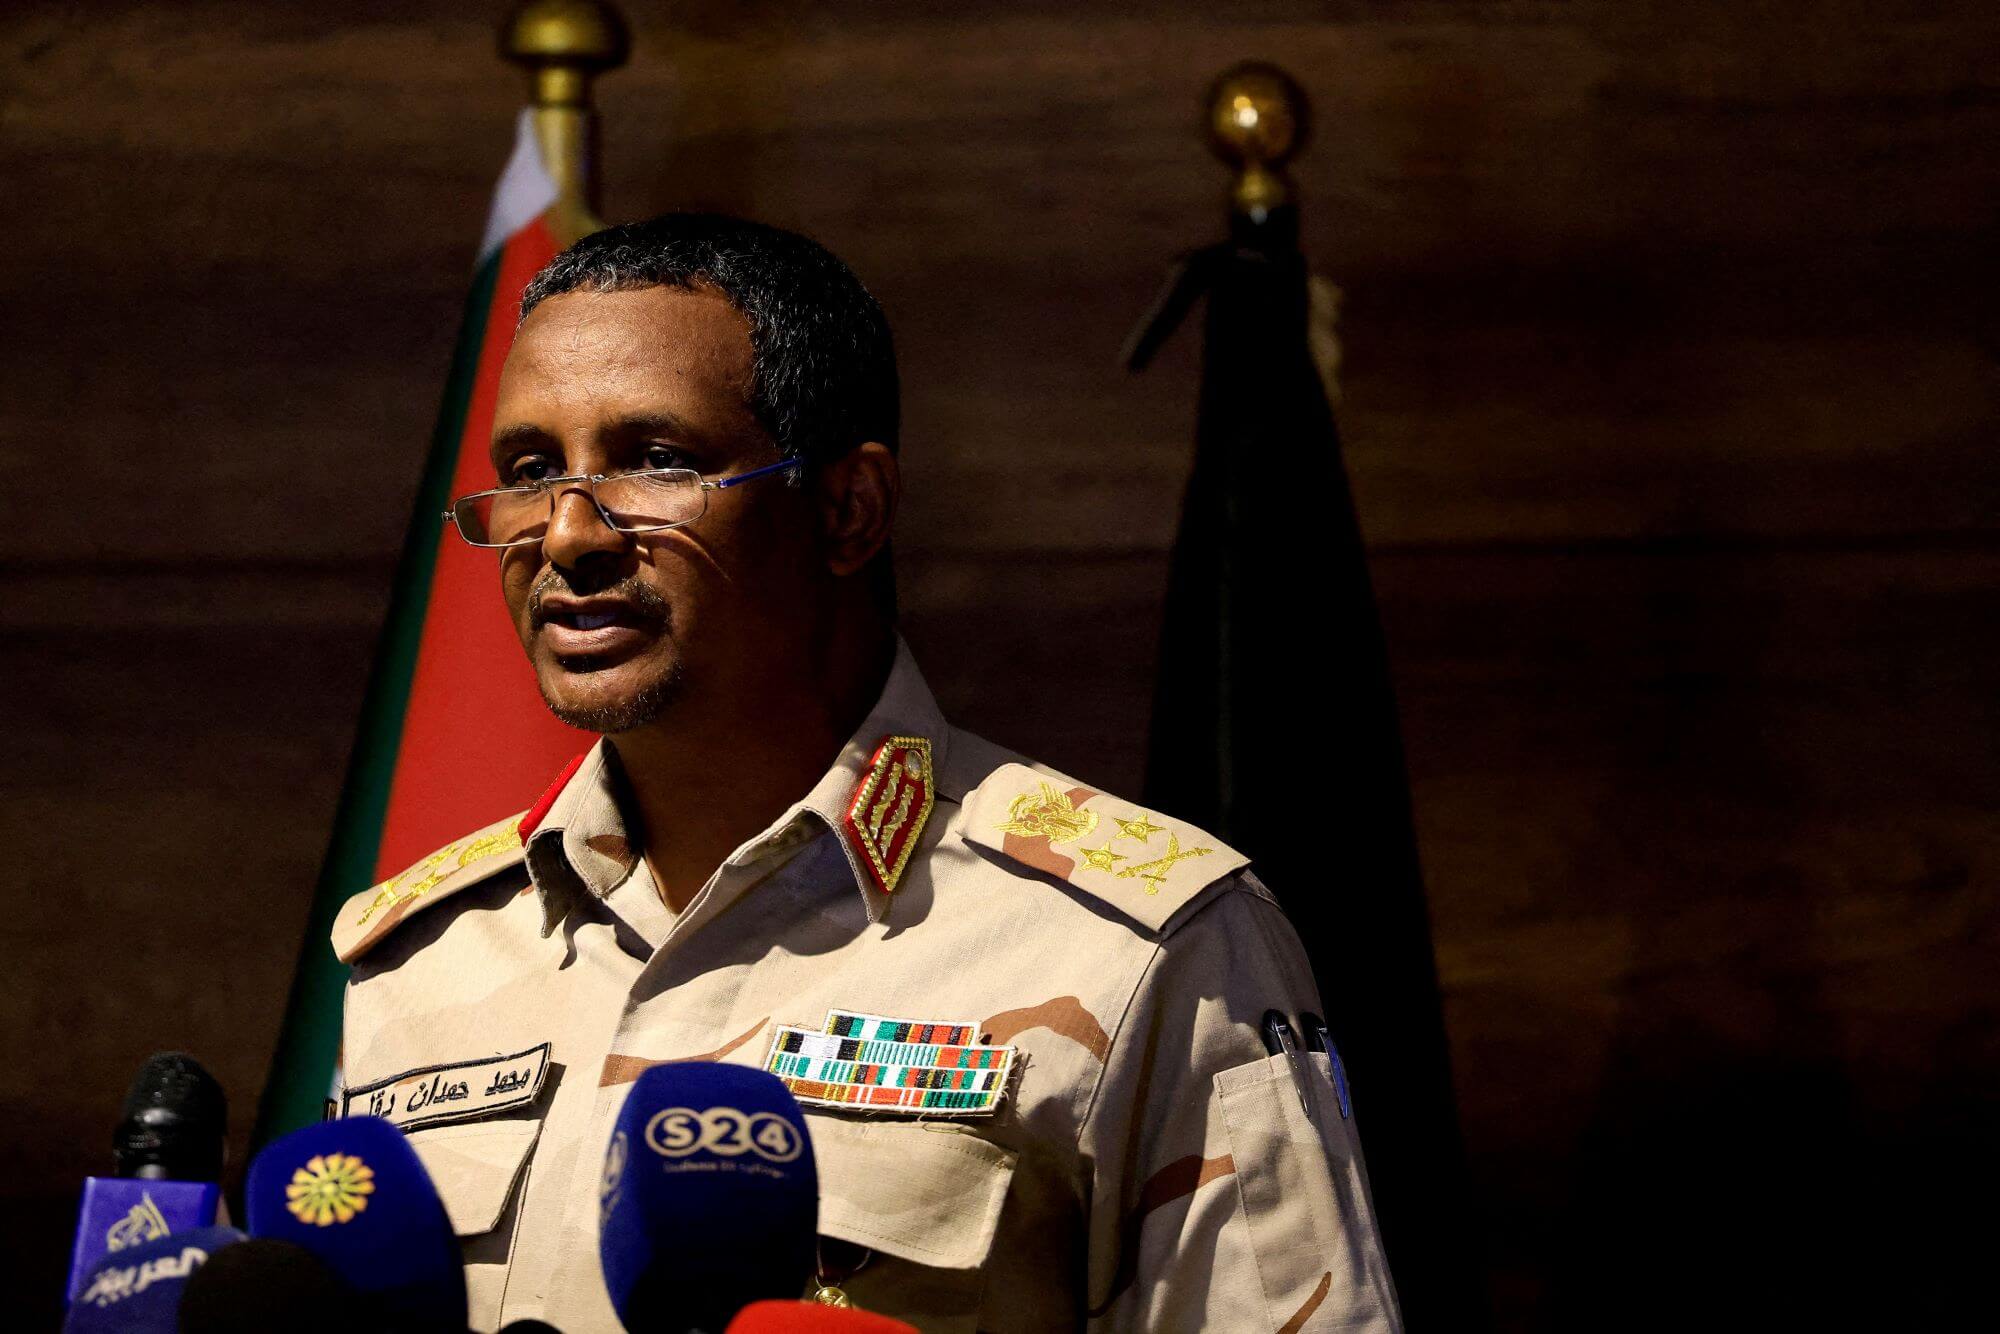 Deputy head of Sudan's sovereign council General Mohamed Hamdan Dagalo speaks during a press conference at Rapid Support Forces head quarter in Khartoum, Sudan in February 2023. © Reuters